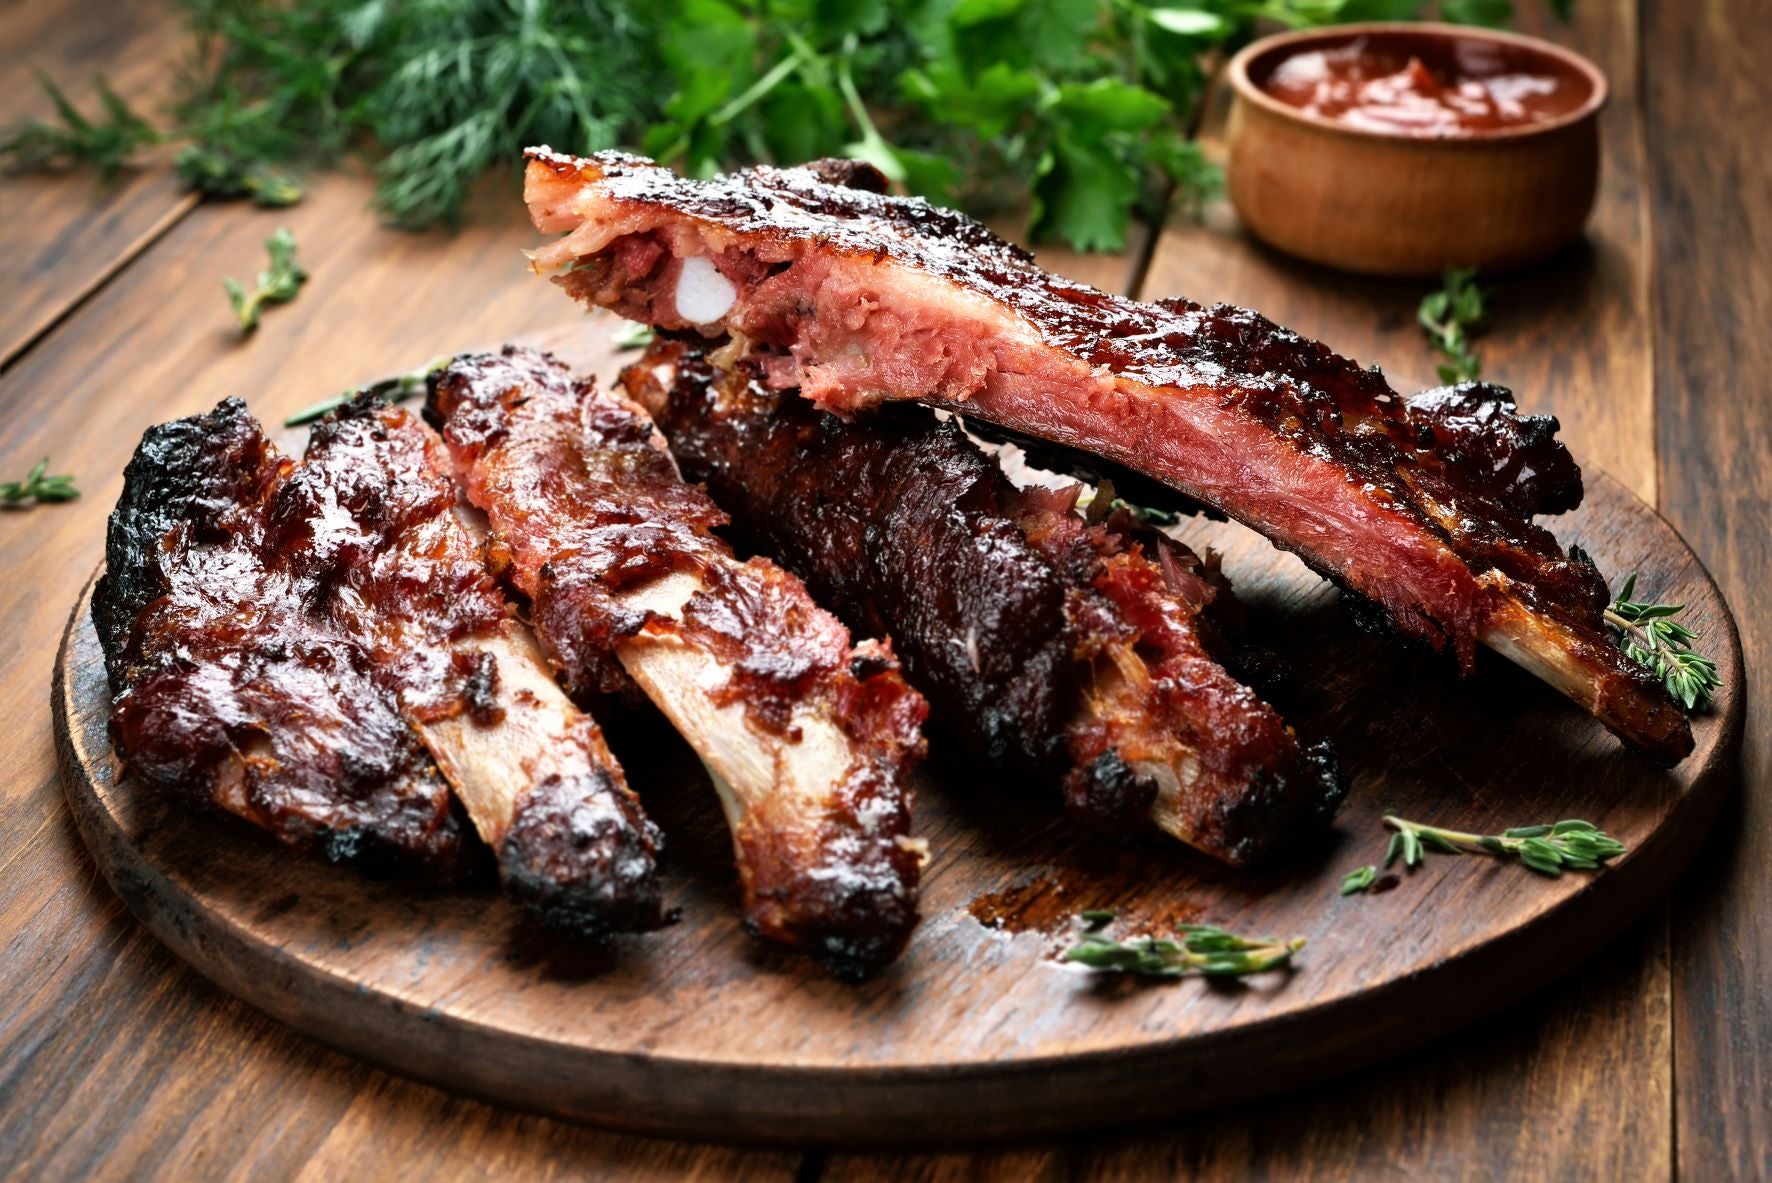 Oven Baked Ribs with a Coffee Cherry Chipotle BBQ Sauce